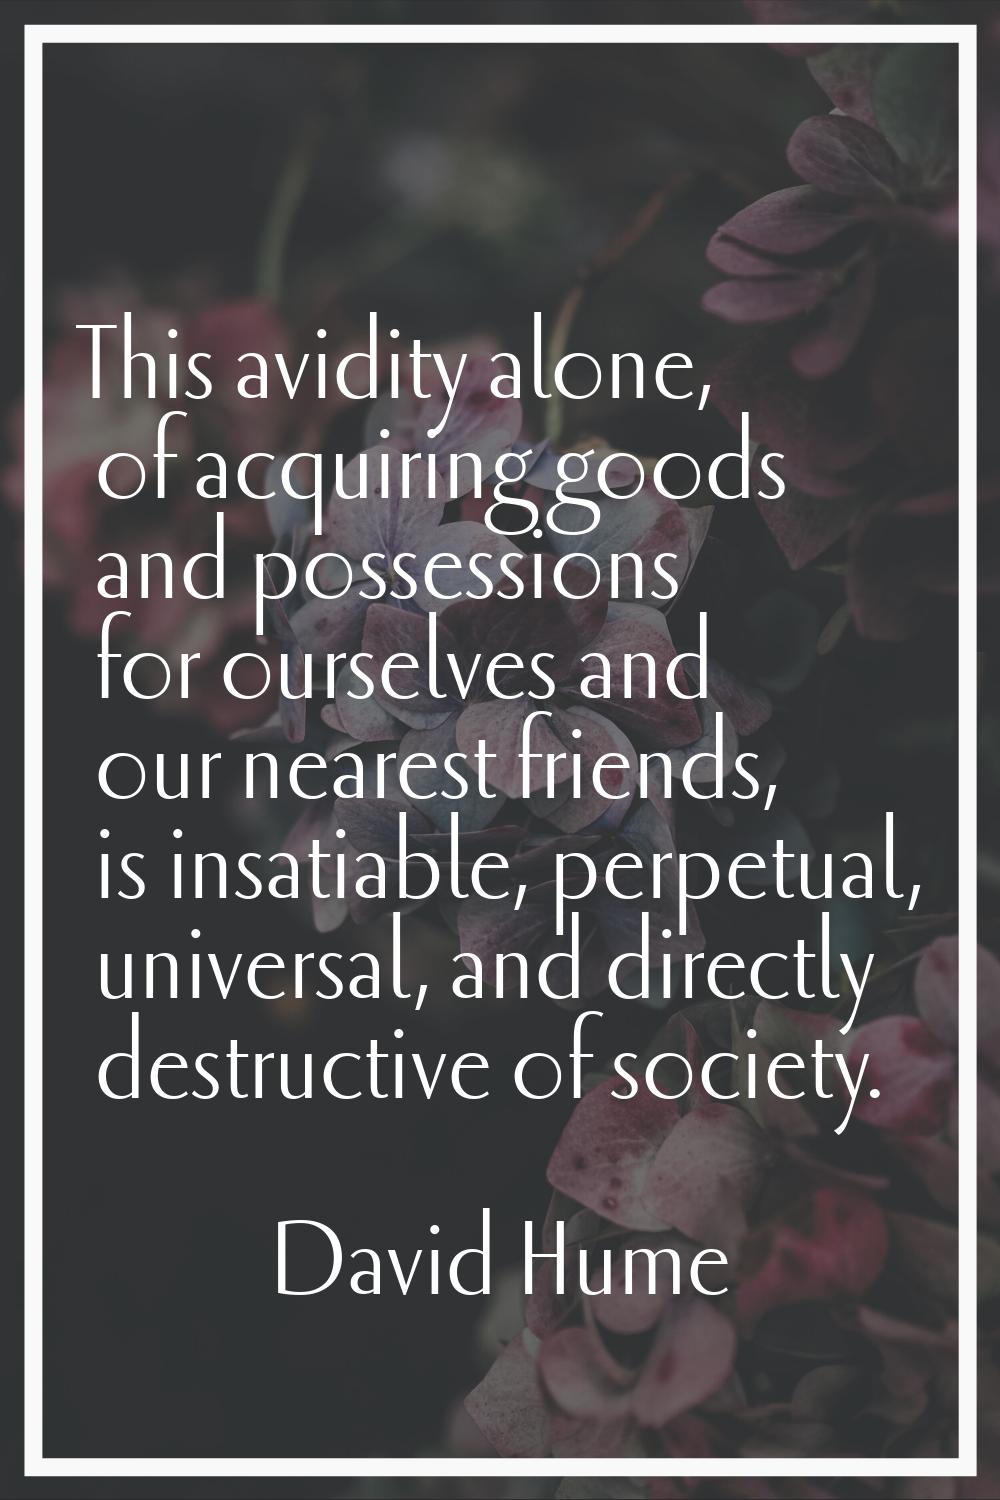 This avidity alone, of acquiring goods and possessions for ourselves and our nearest friends, is in